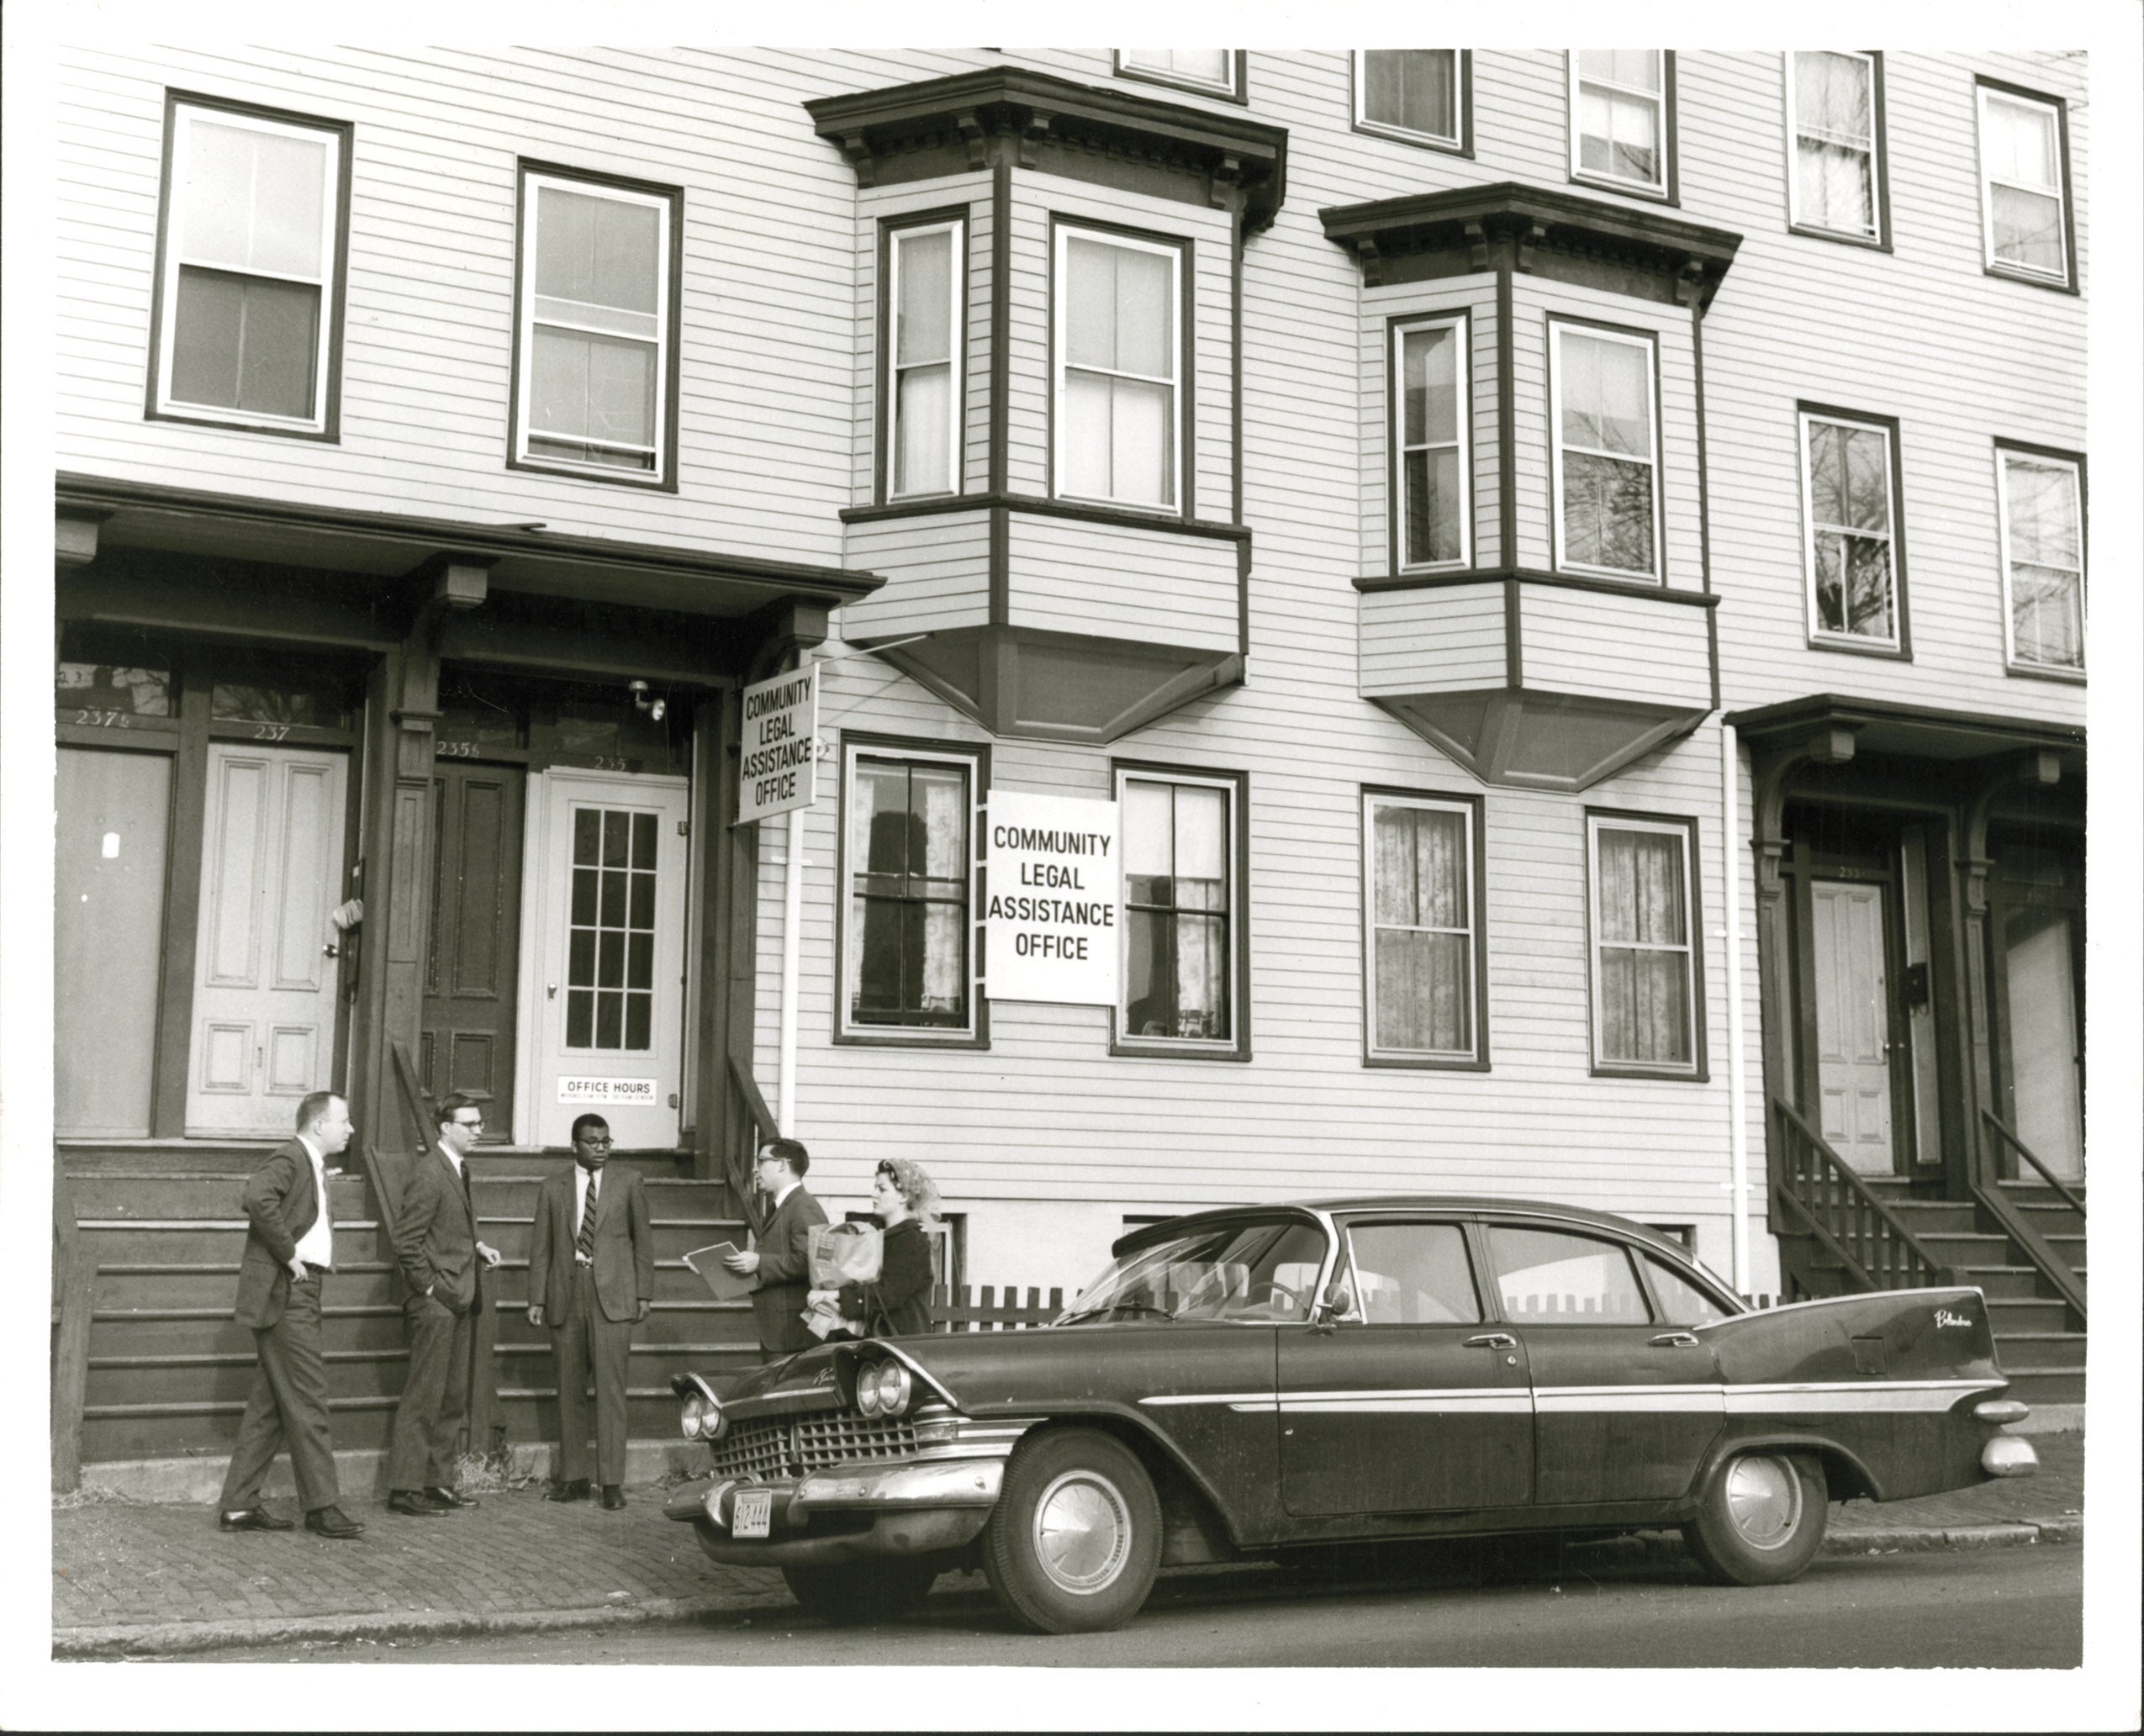 Four men and a woman outside the Community Legal Assistance Office, 1967